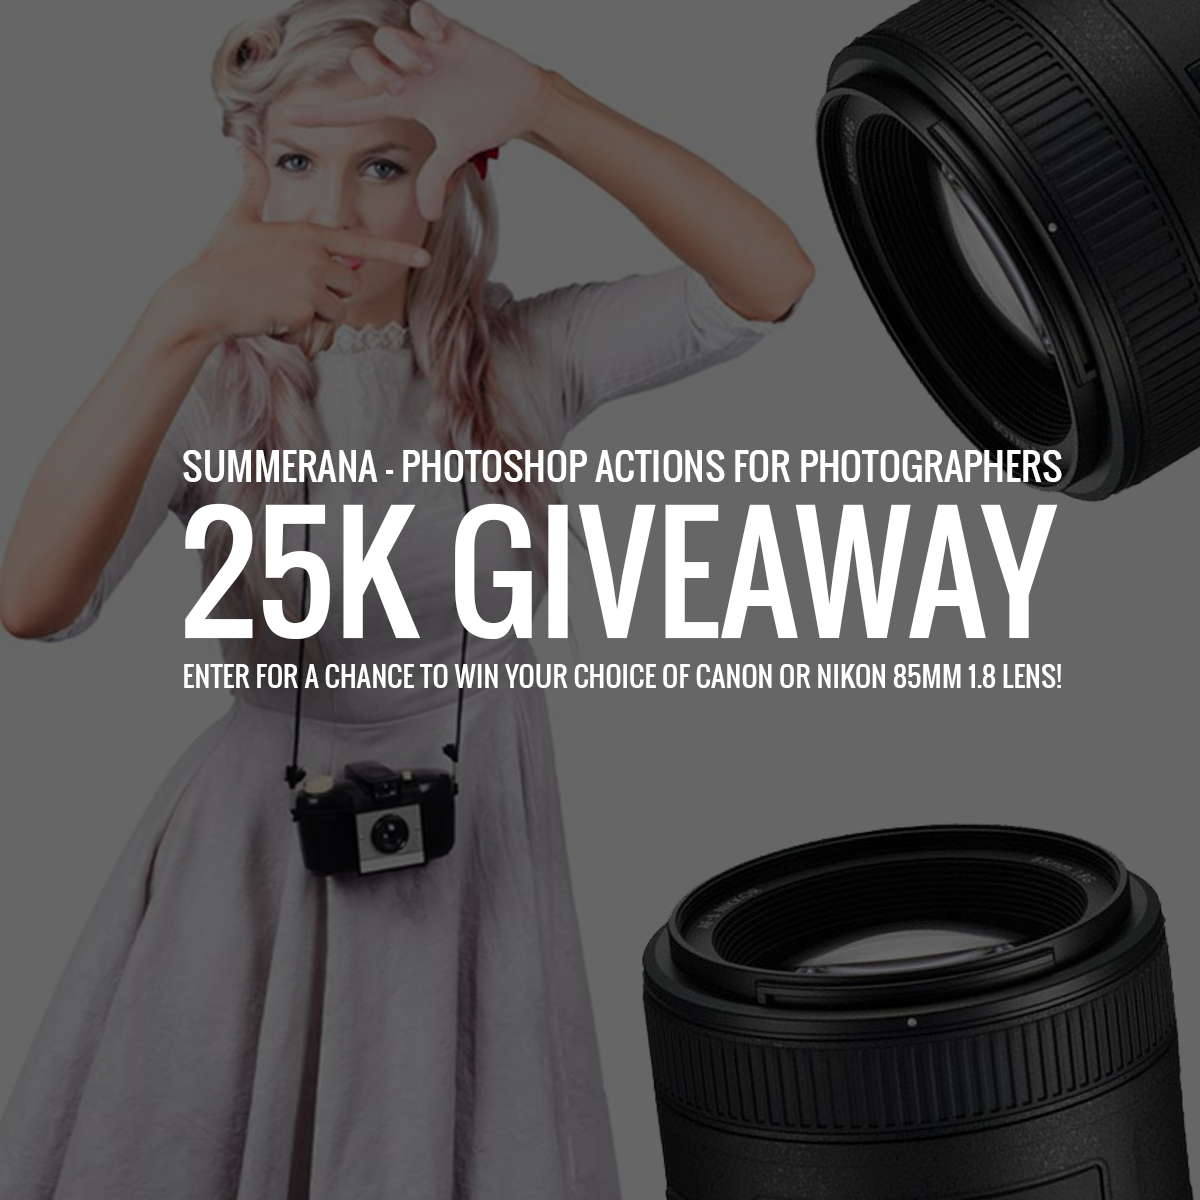 summerana-photoshop-actions-for-photographers-giveaway-slider25K-2